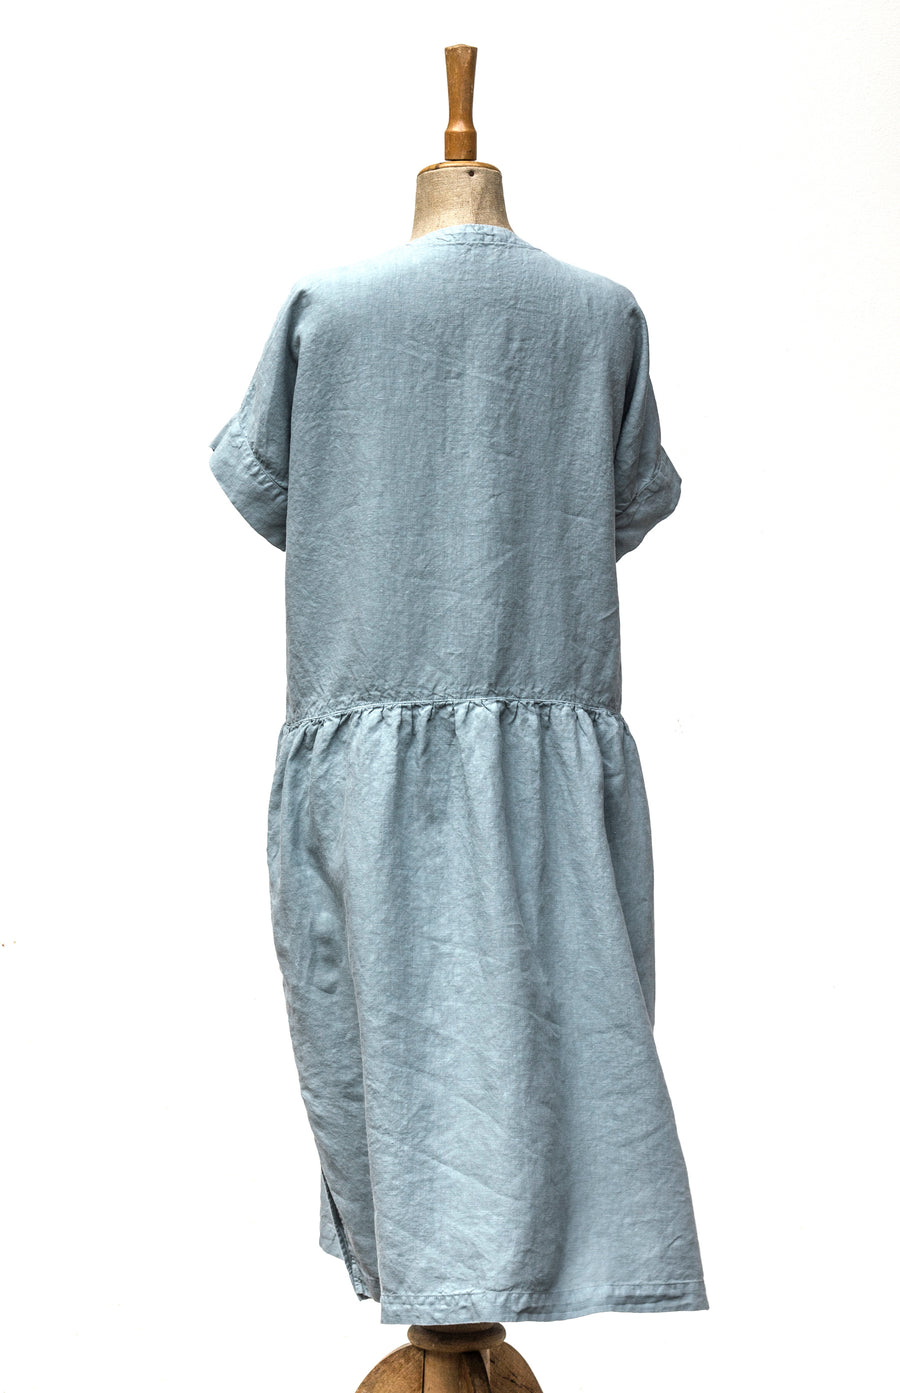 Autumn country dress in Stone Blue shade